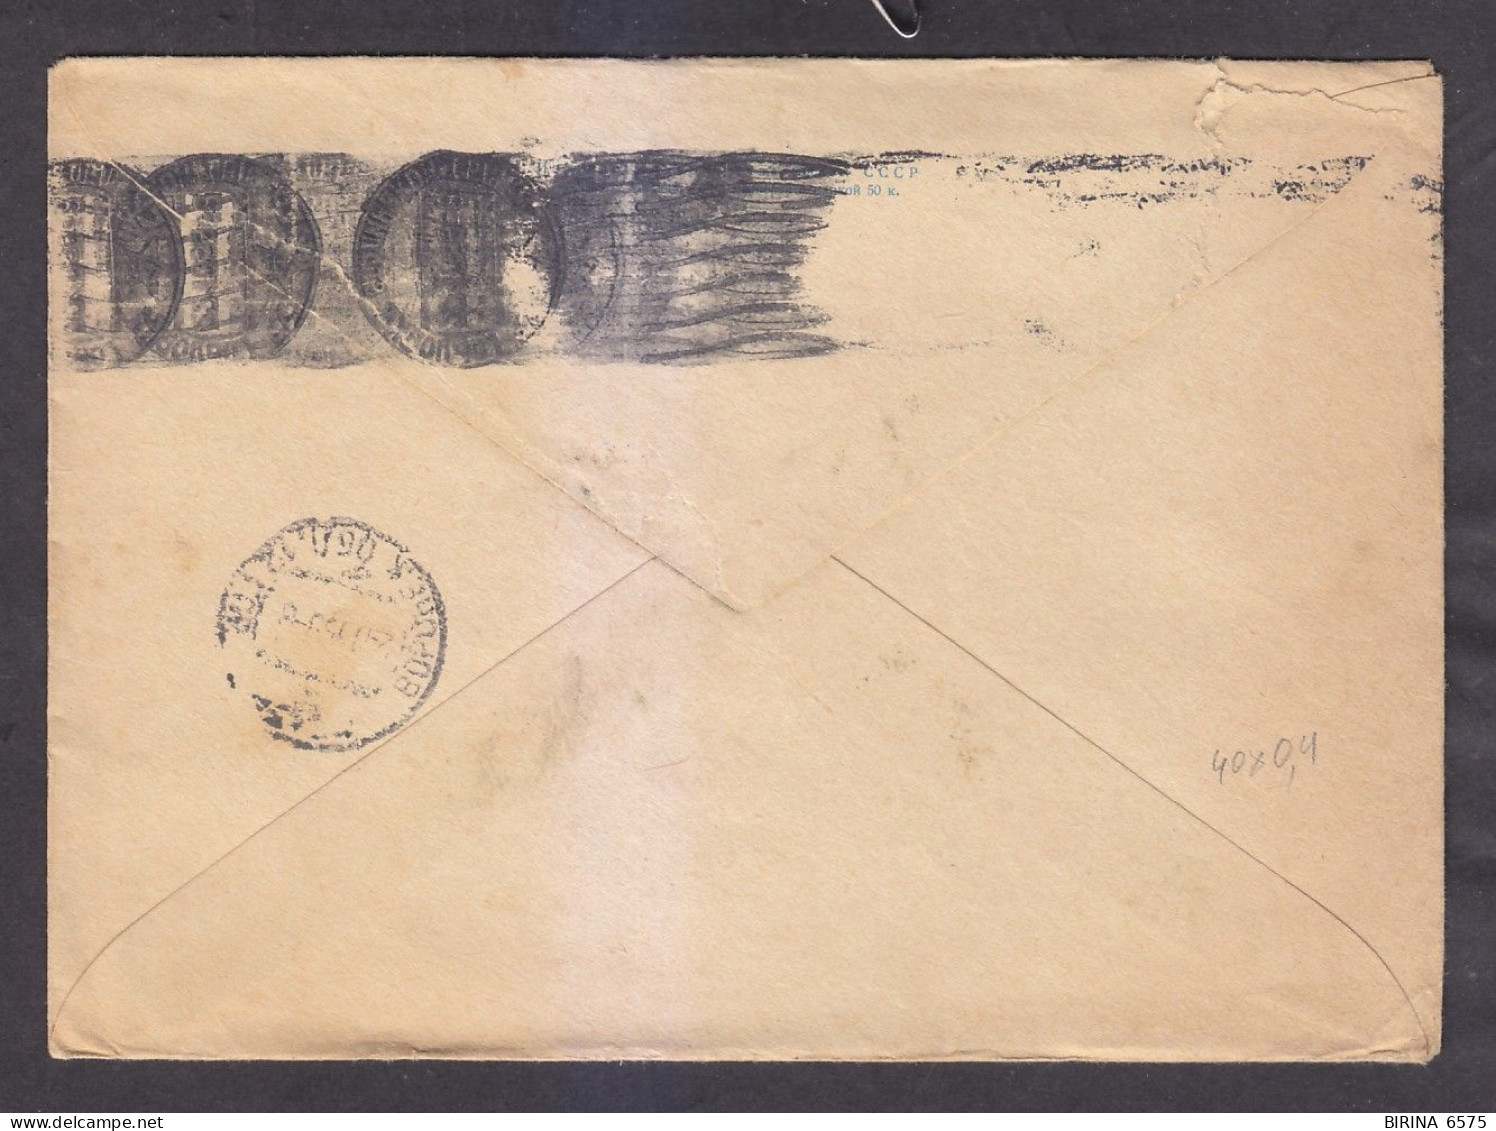 Envelope. The USSR. HAPPY SPRING DAY! Mail. 1959. - 8-46 - Covers & Documents